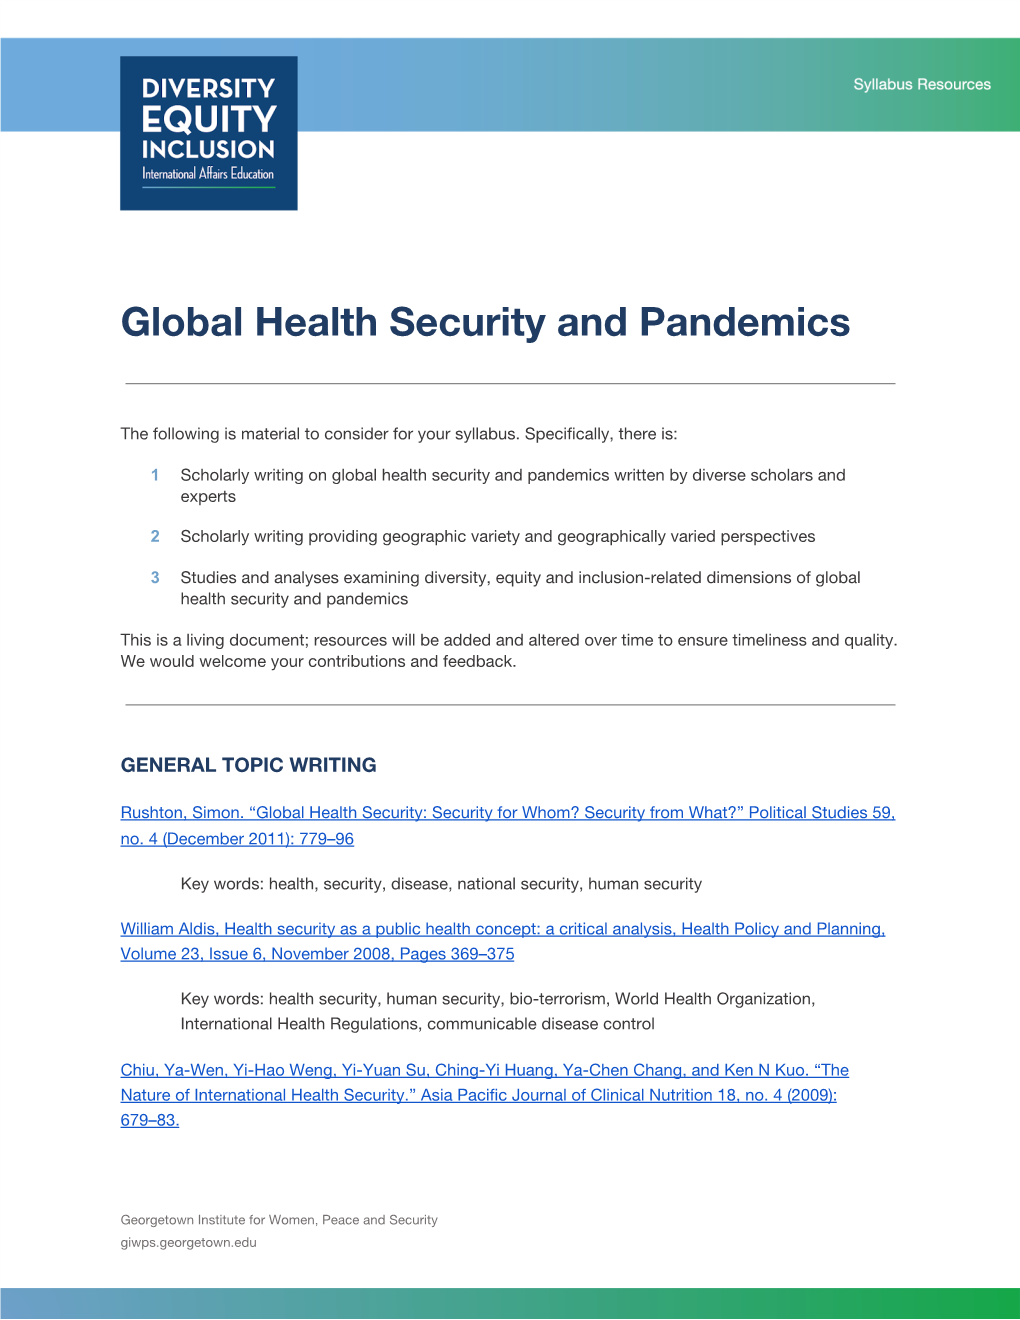 Global Health Security and Pandemics